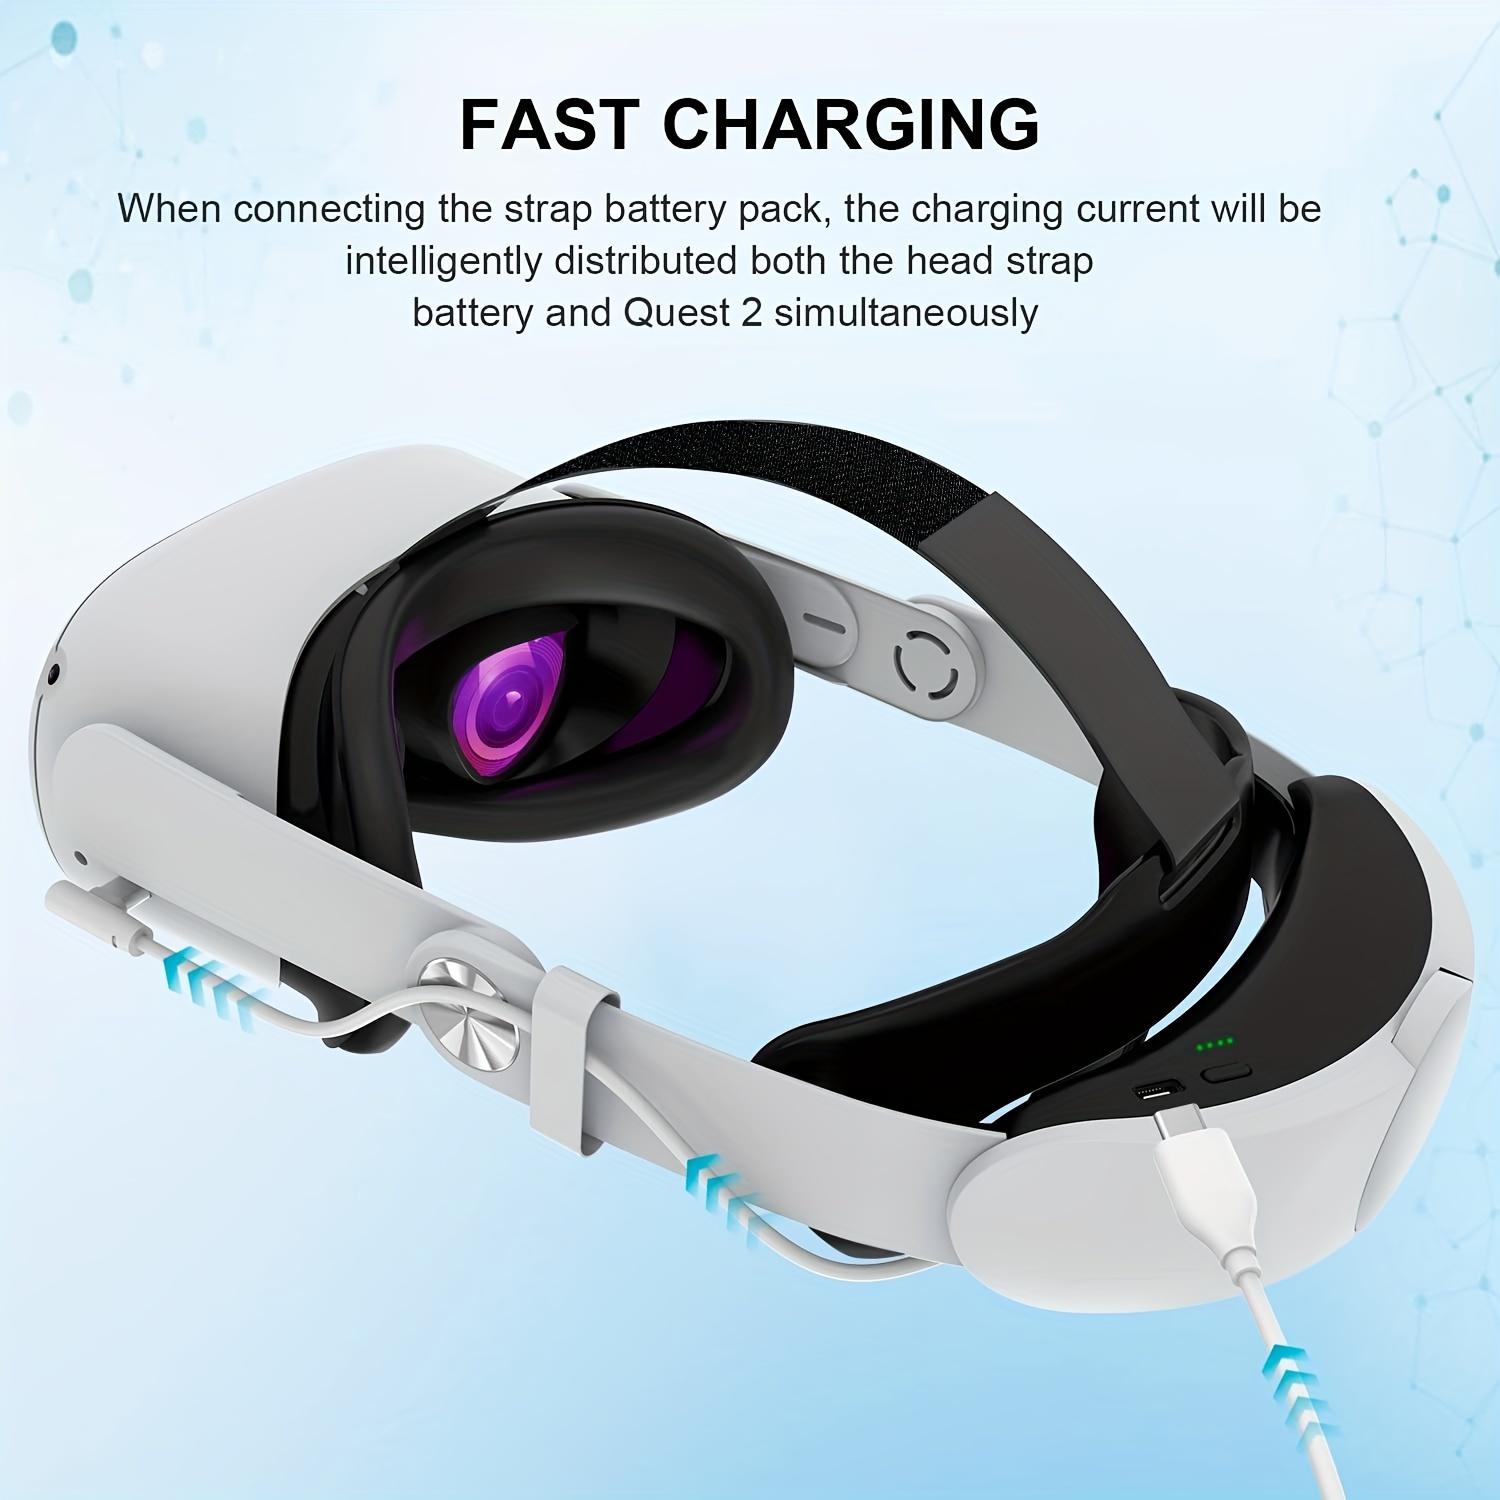  Battery Pack for Oculus Quest 2, Accessories for Oculus Quest 2  Headset, 5000mAh Extended Power Compatible with Meta Quest 2 Oculus  Original Strap and Elite Strap Extended Play time VR Power